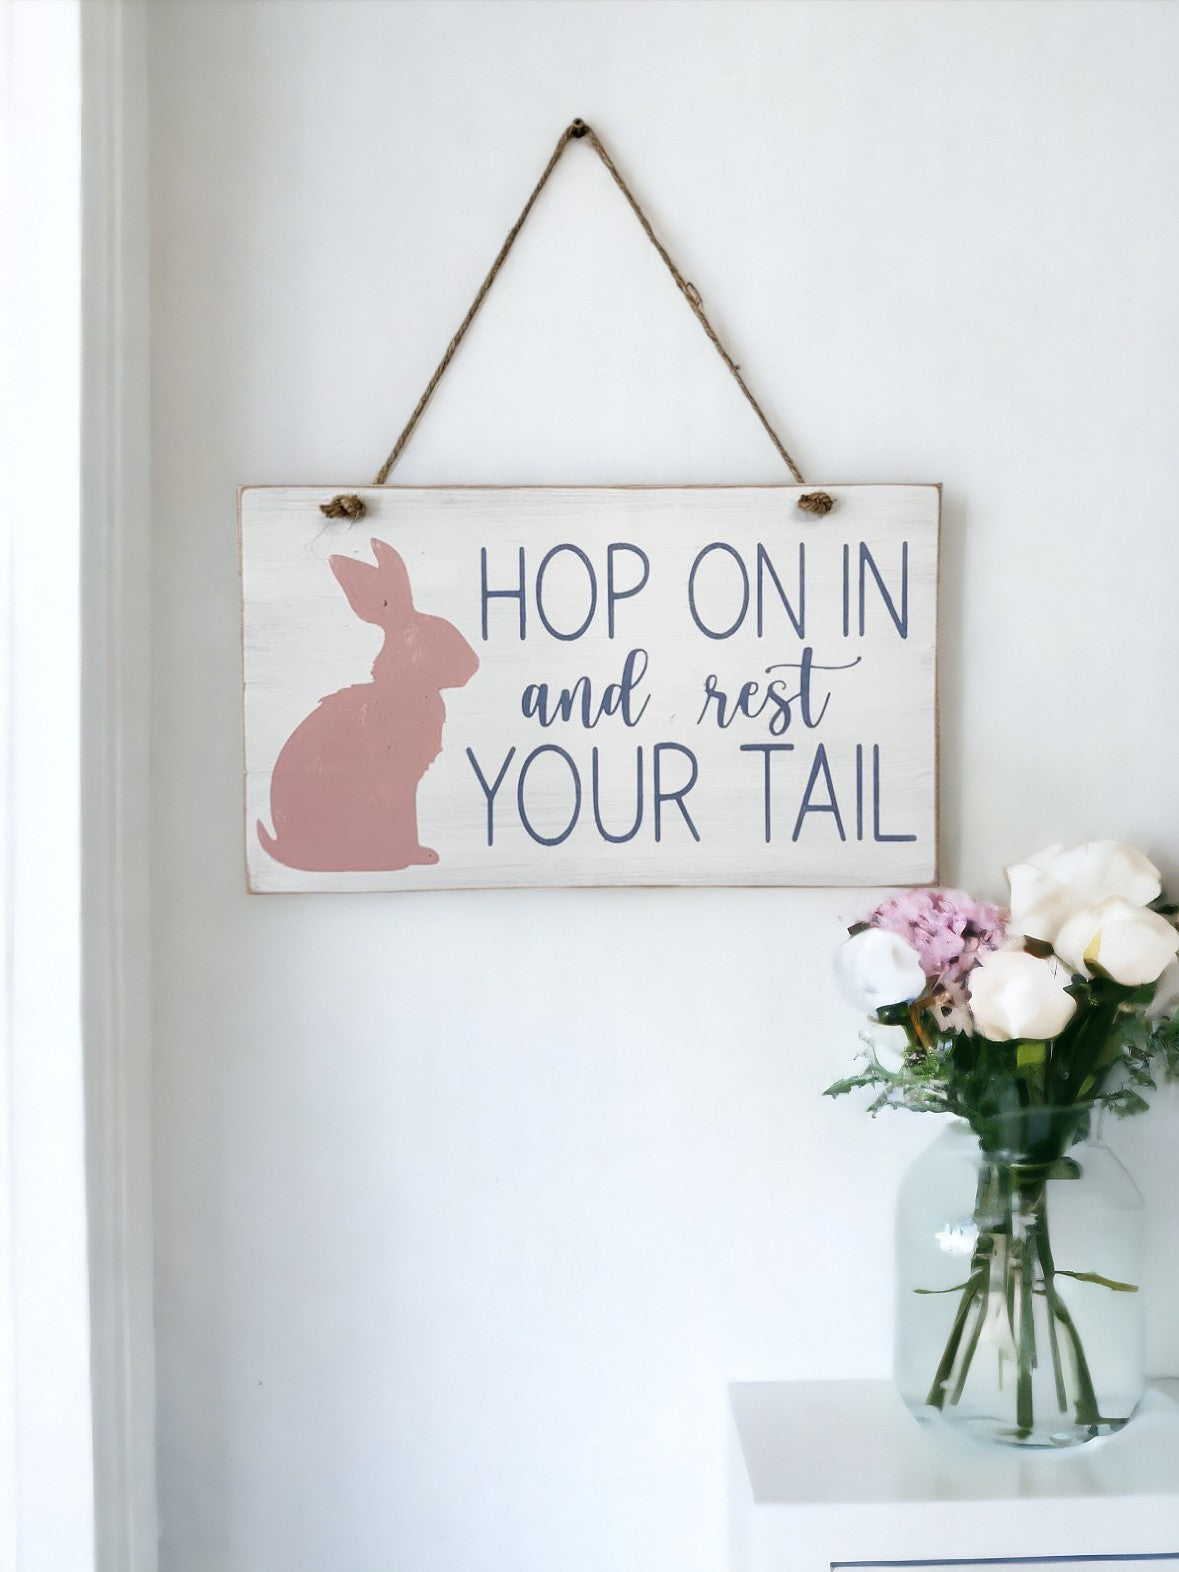 7" x 12" hanging wood sign with 'Hop On In And Rest Your Tail' in lavender text and a pink bunny, ideal for farmhouse Easter decor